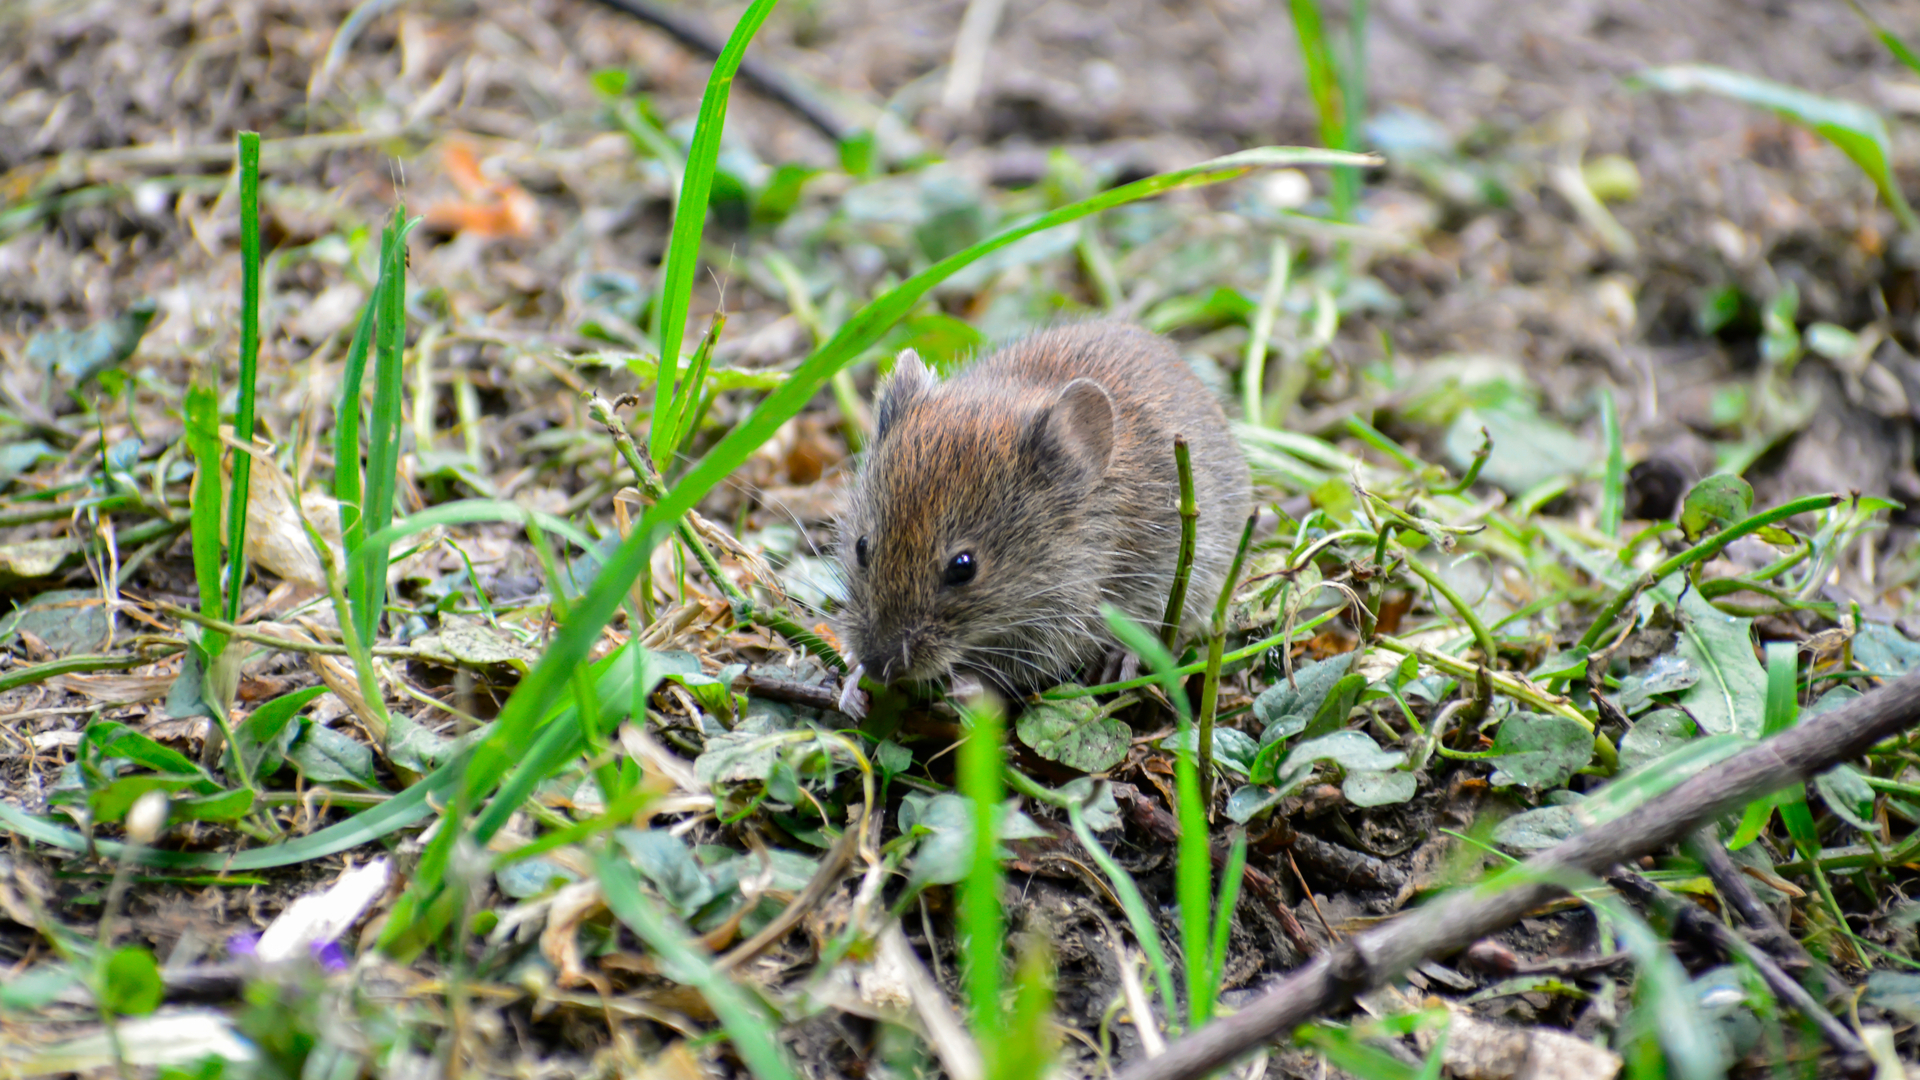 Keep Your Eyes Out for Vole Activity in Your Garden in Early Spring